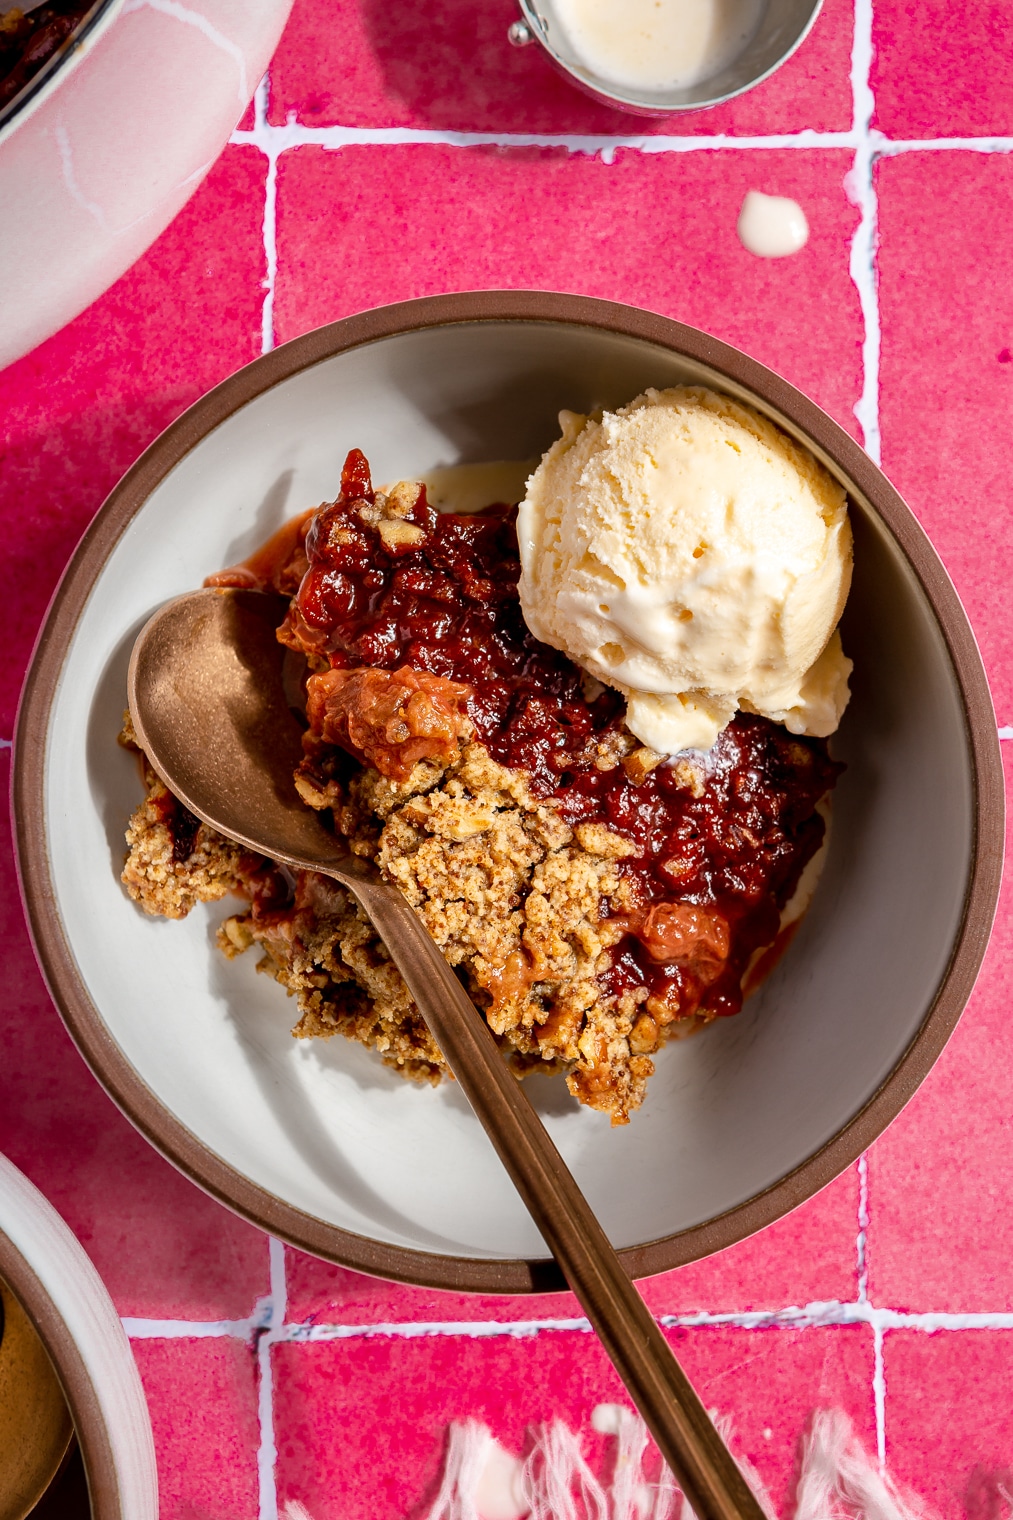 A bowl of strawberry rhubarb crisp topped with a scoop of vanilla ice cream sitting on a pink tiled background.